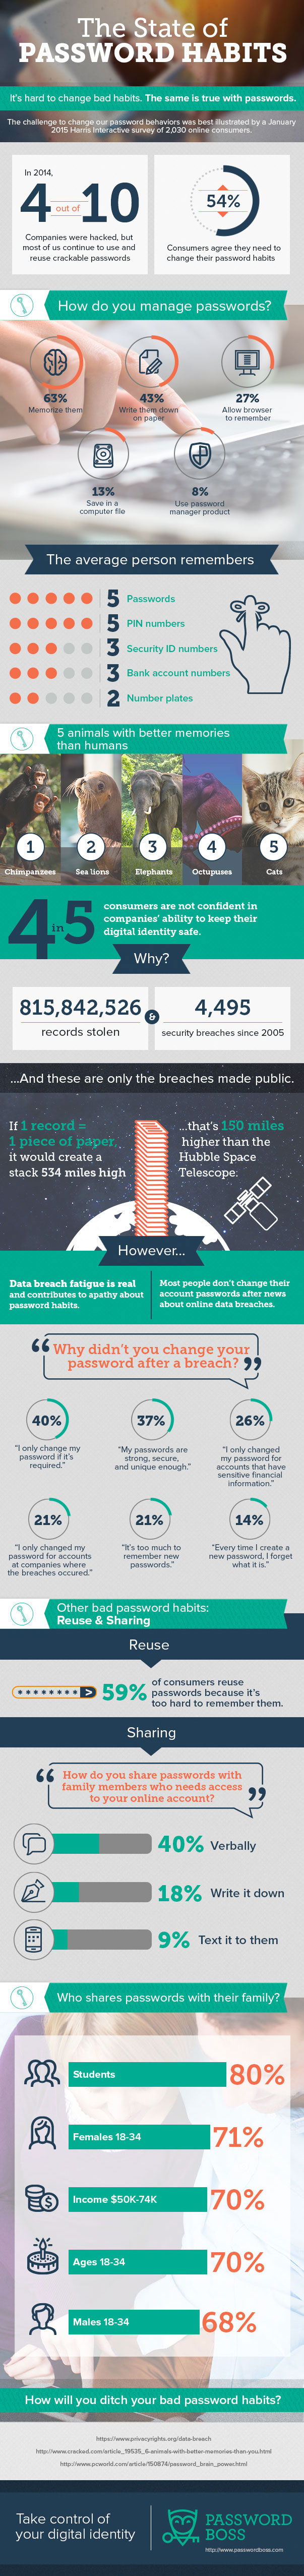 The-State-of-Password-Habits-Infographic